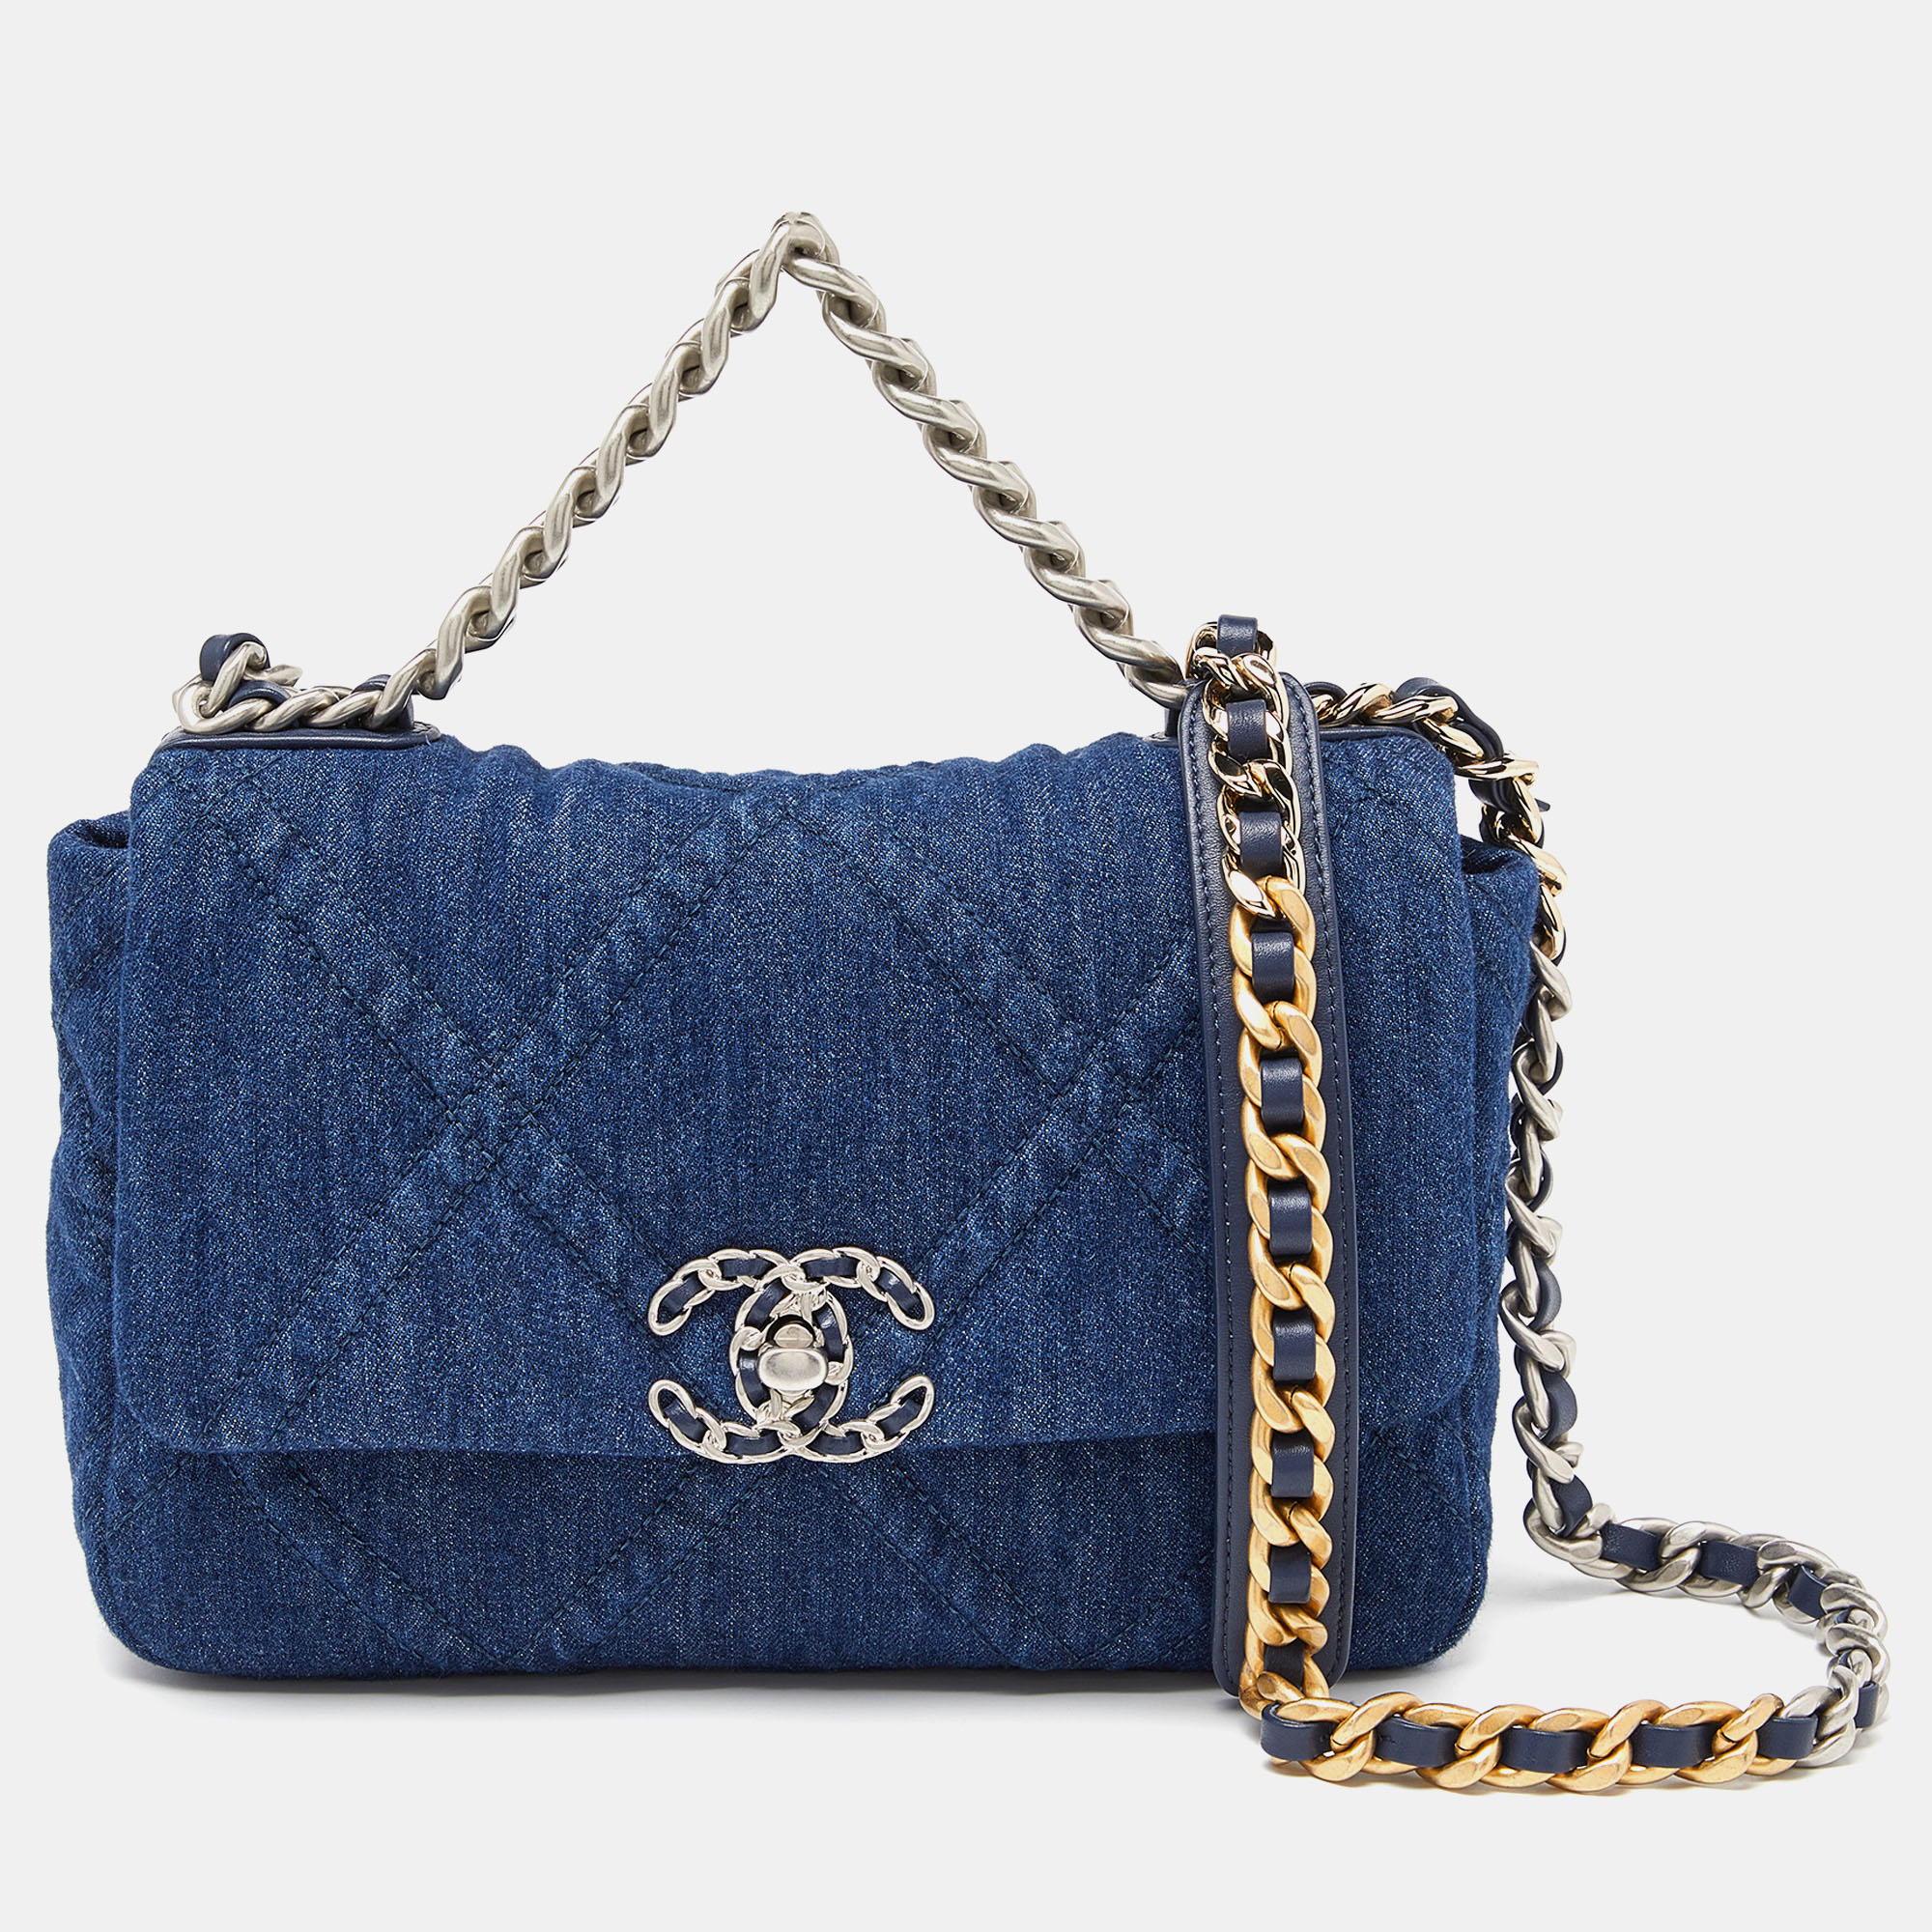 Pre-owned Chanel Blue Quilted Denim Medium 19 Flap Bag